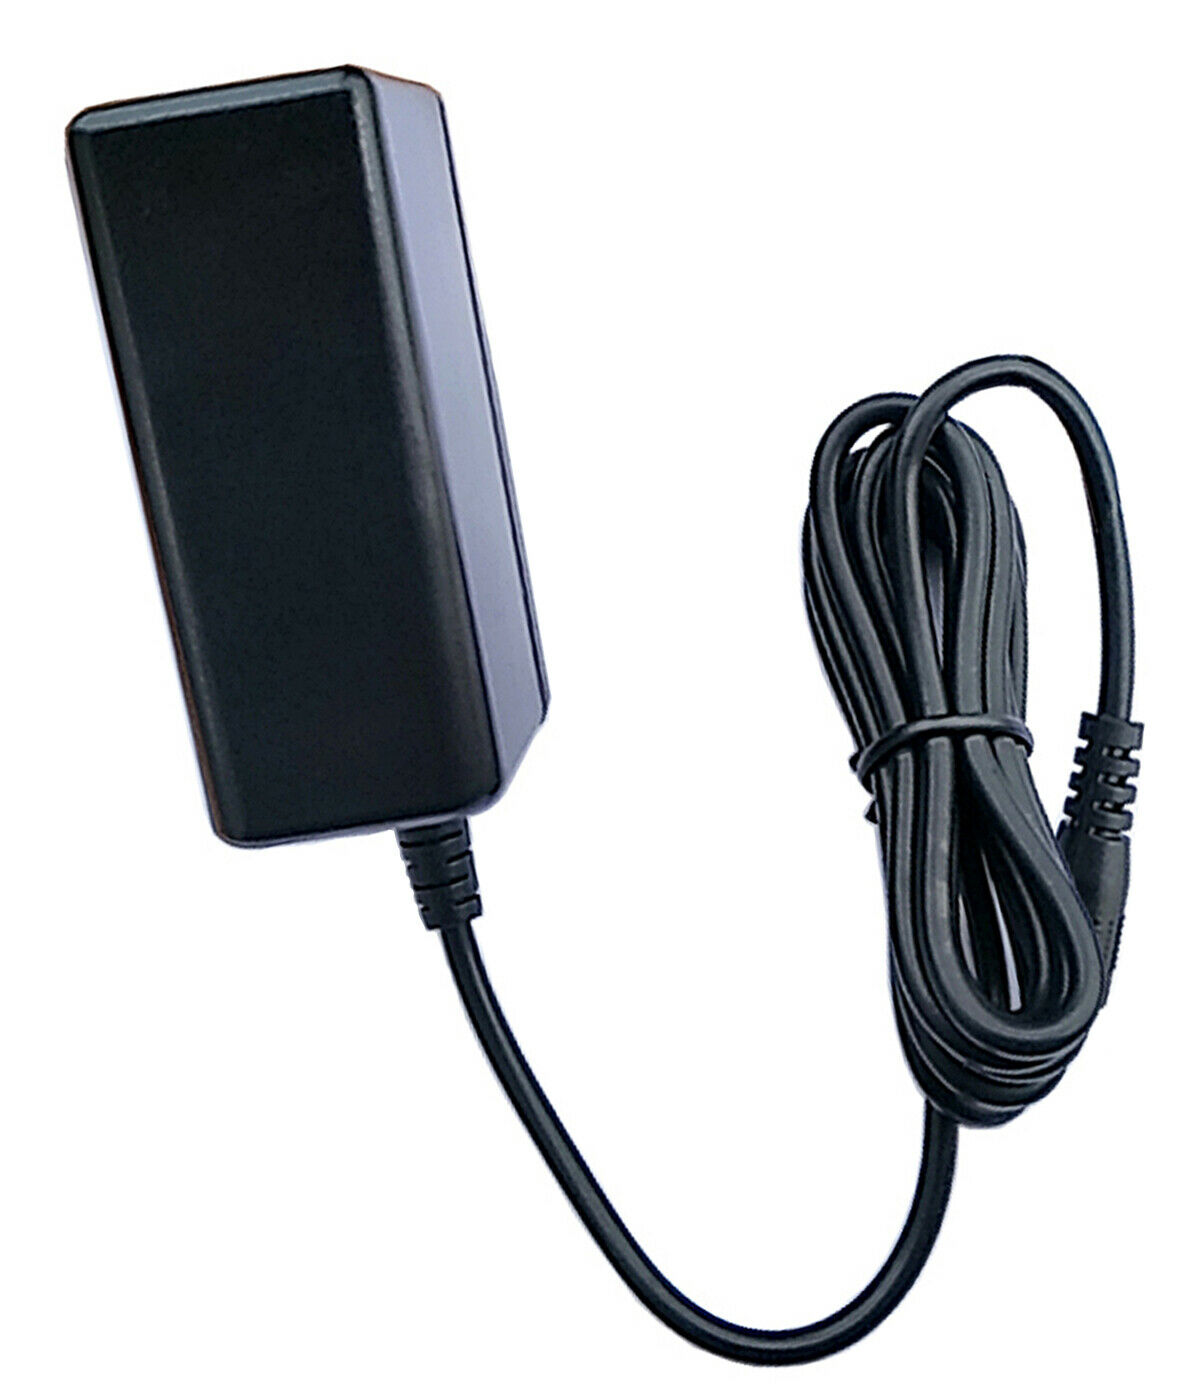 AC DC Adapter Charger for Klipsch KMC 3 Wireless Speaker Power Supply Cord Mains This product is good for the following